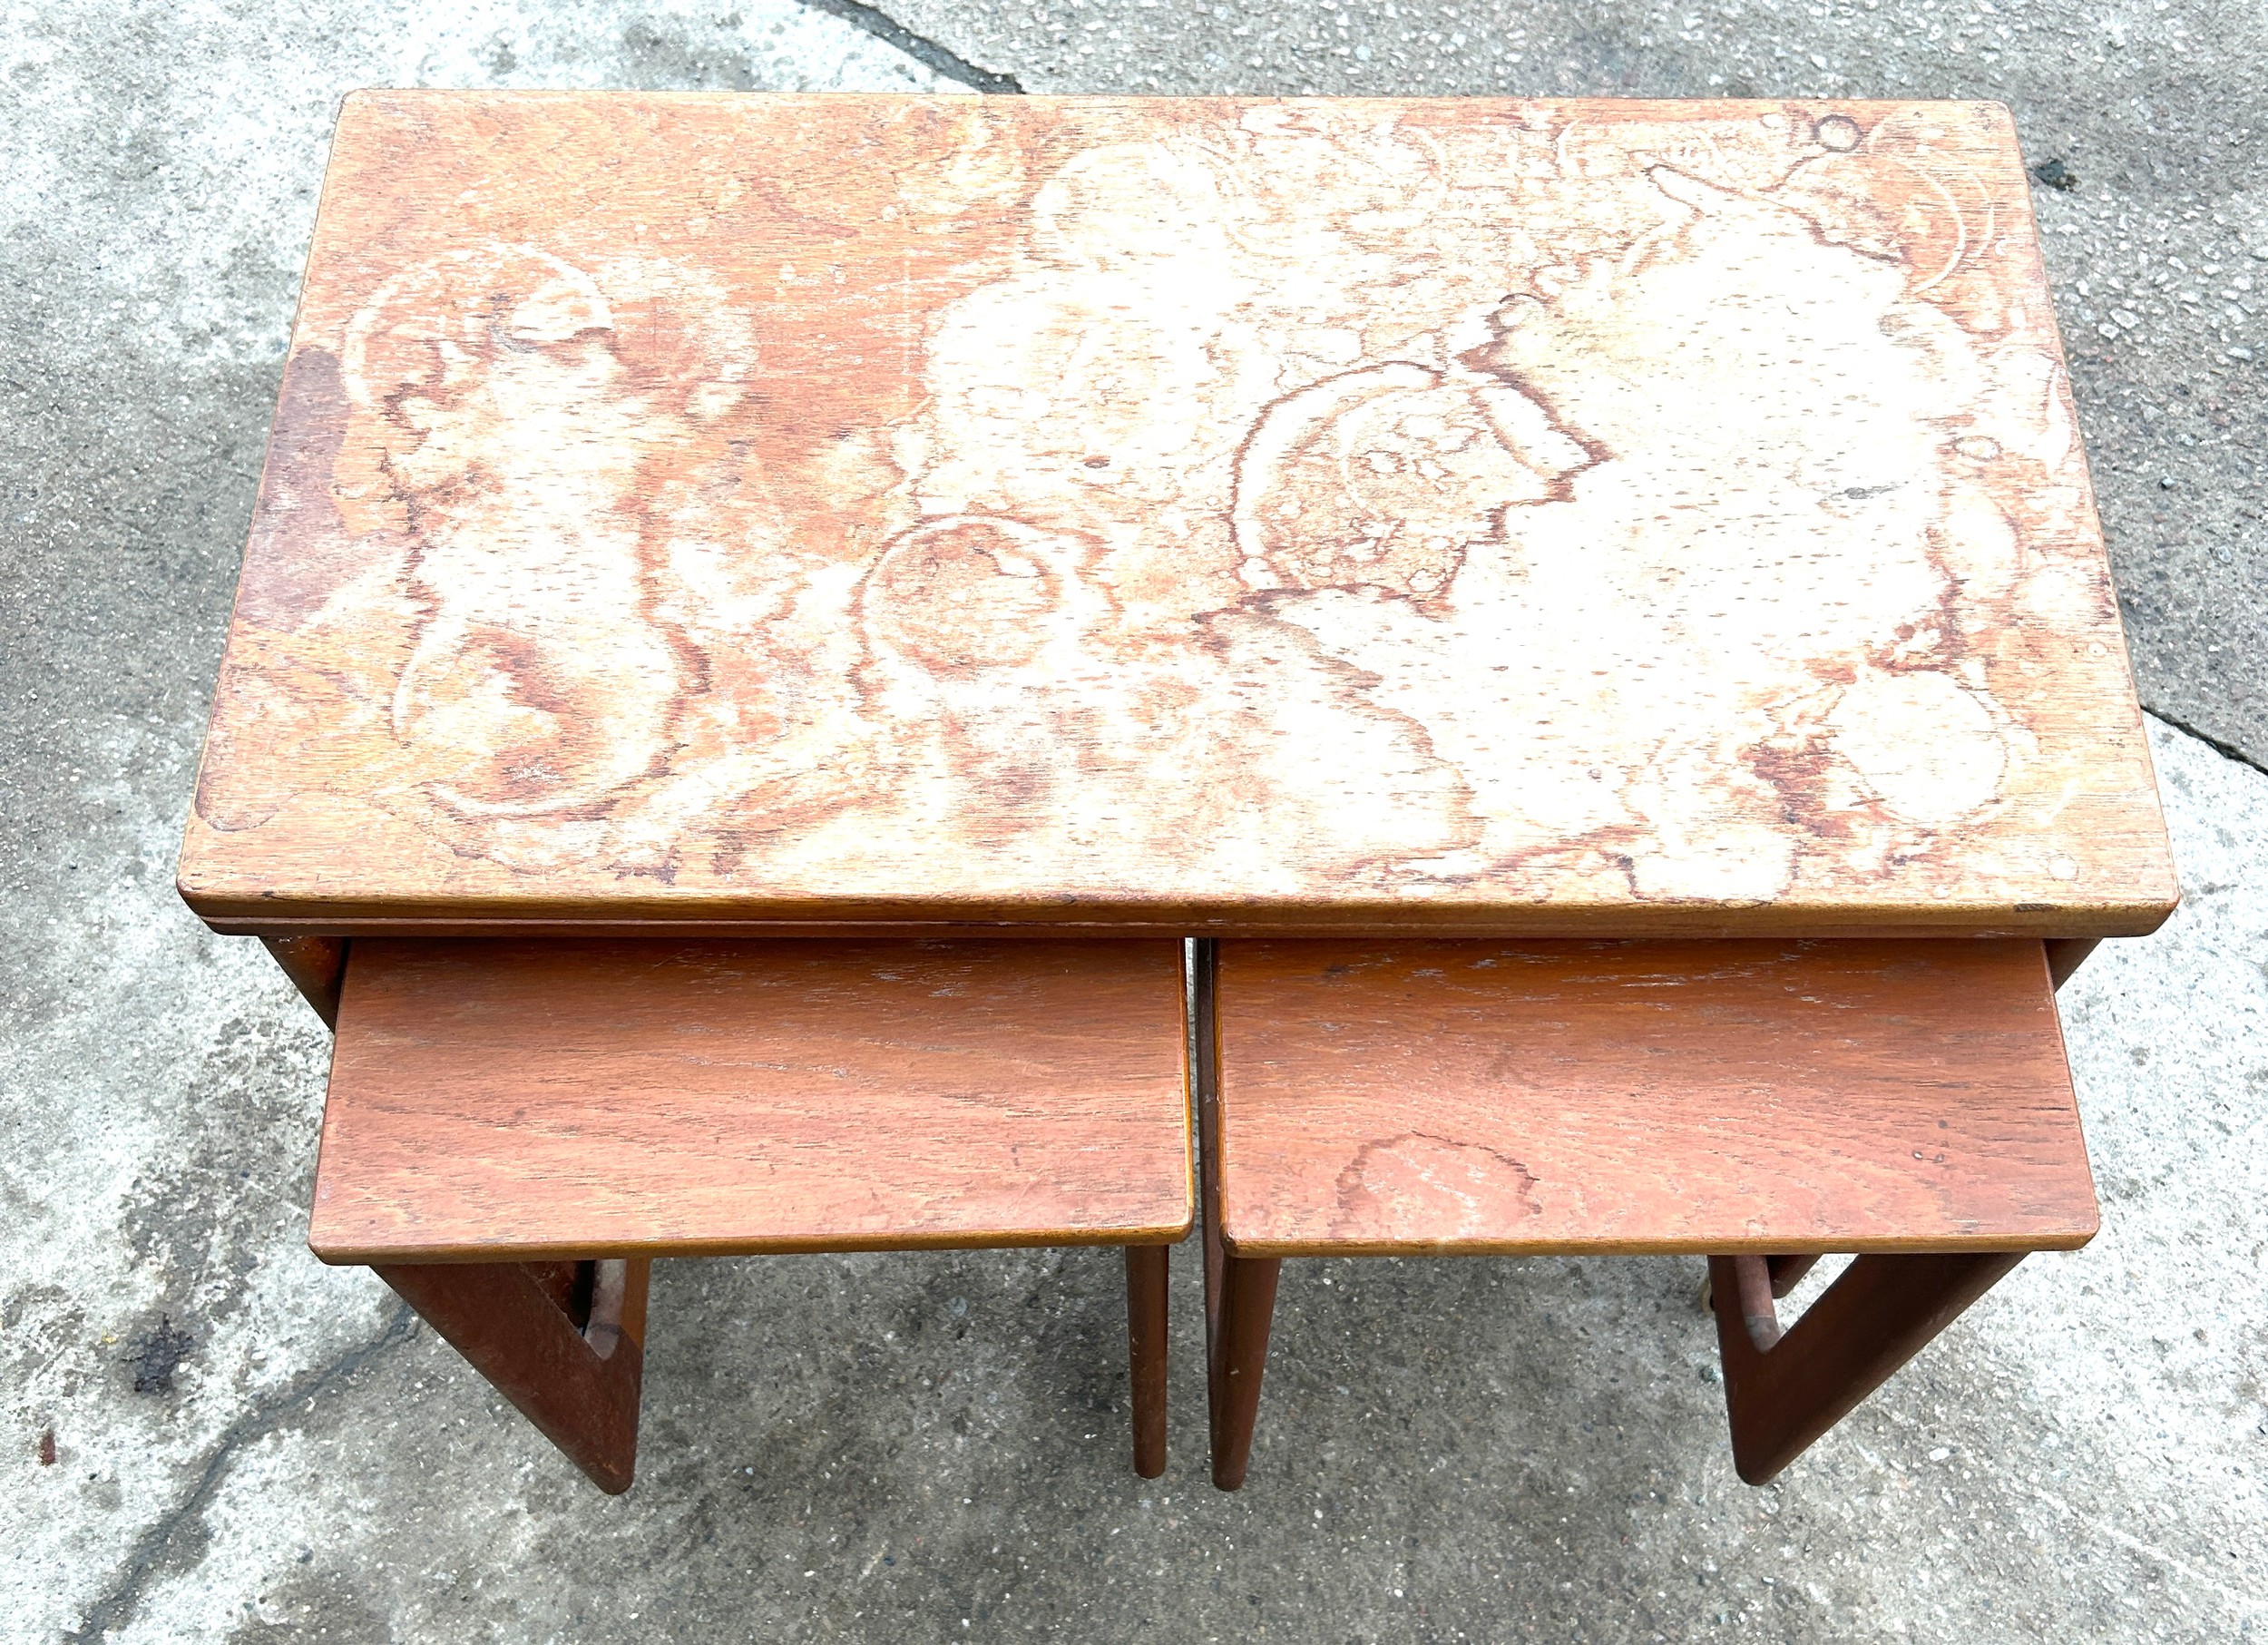 Teak nest of three tables in need of repair to top - water damaged - Image 2 of 3